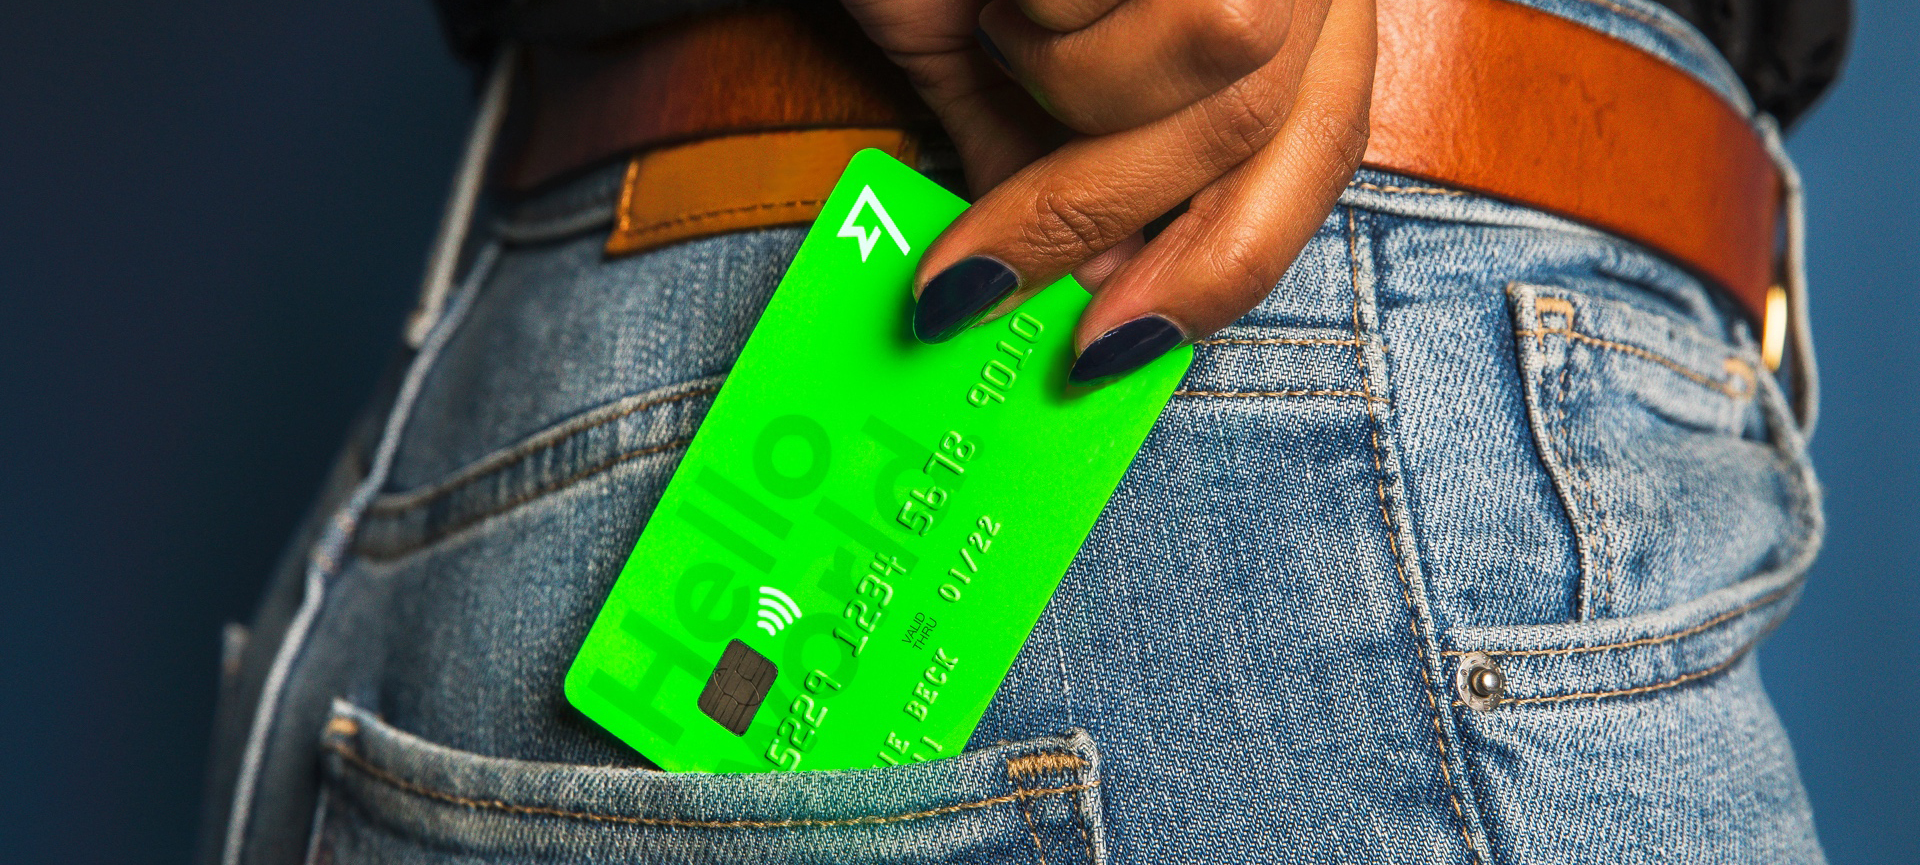 Wise Card Review: Pros and Cons, Fees, and is Wise Debit Card Safe?